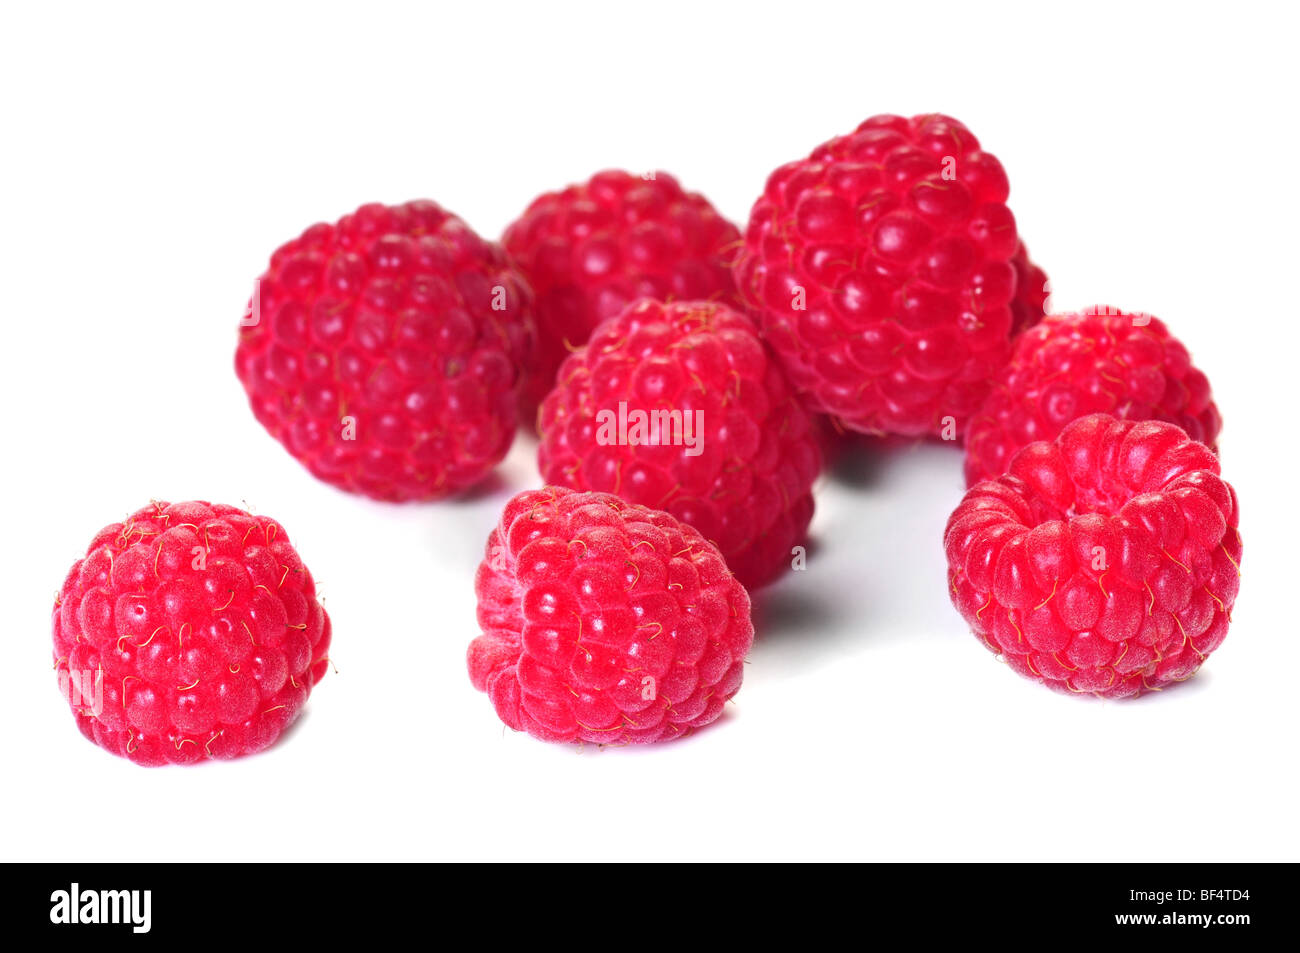 Group of raspberry over white background Stock Photo